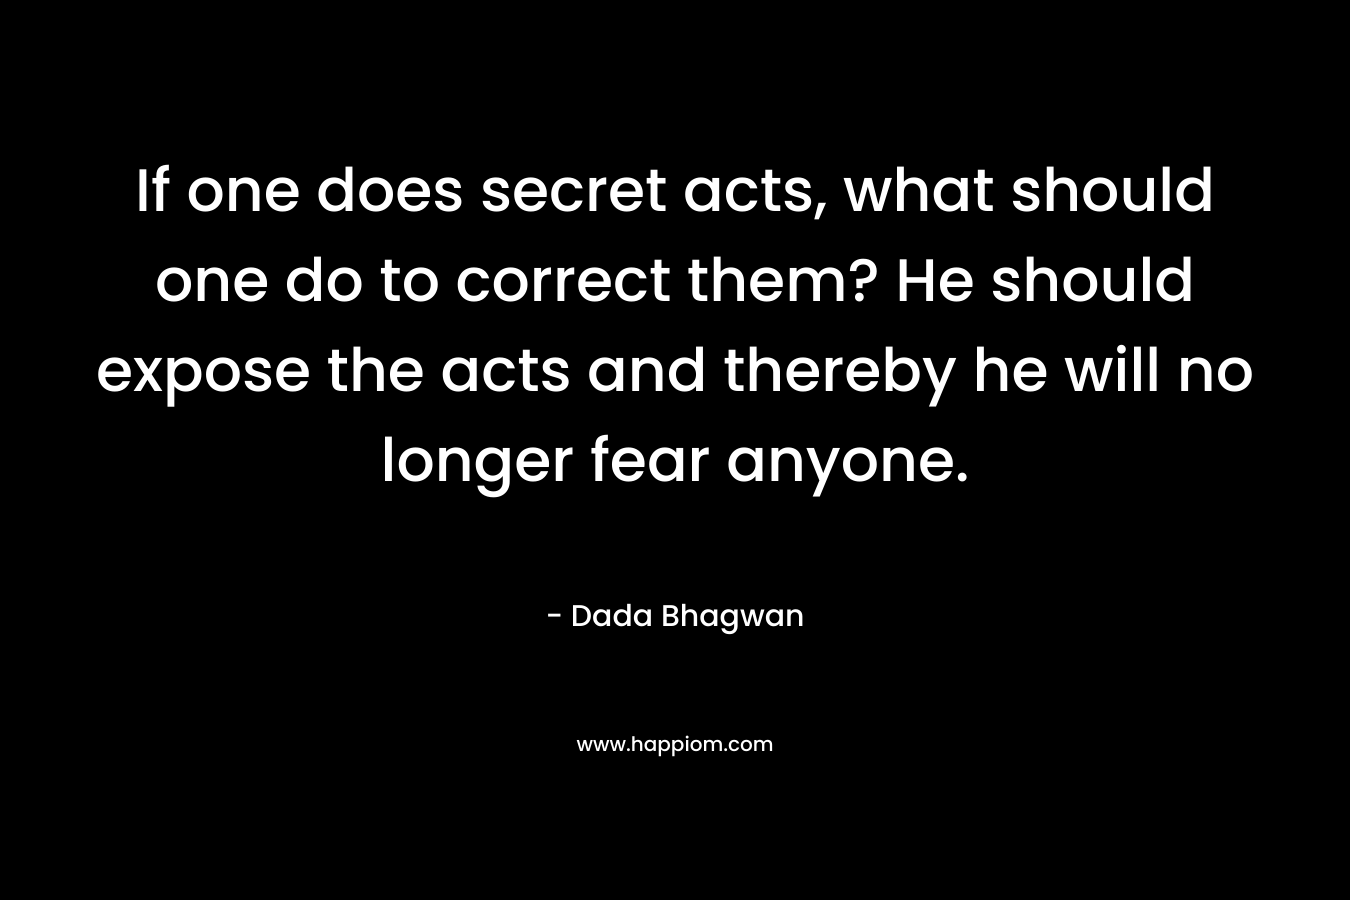 If one does secret acts, what should one do to correct them? He should expose the acts and thereby he will no longer fear anyone.